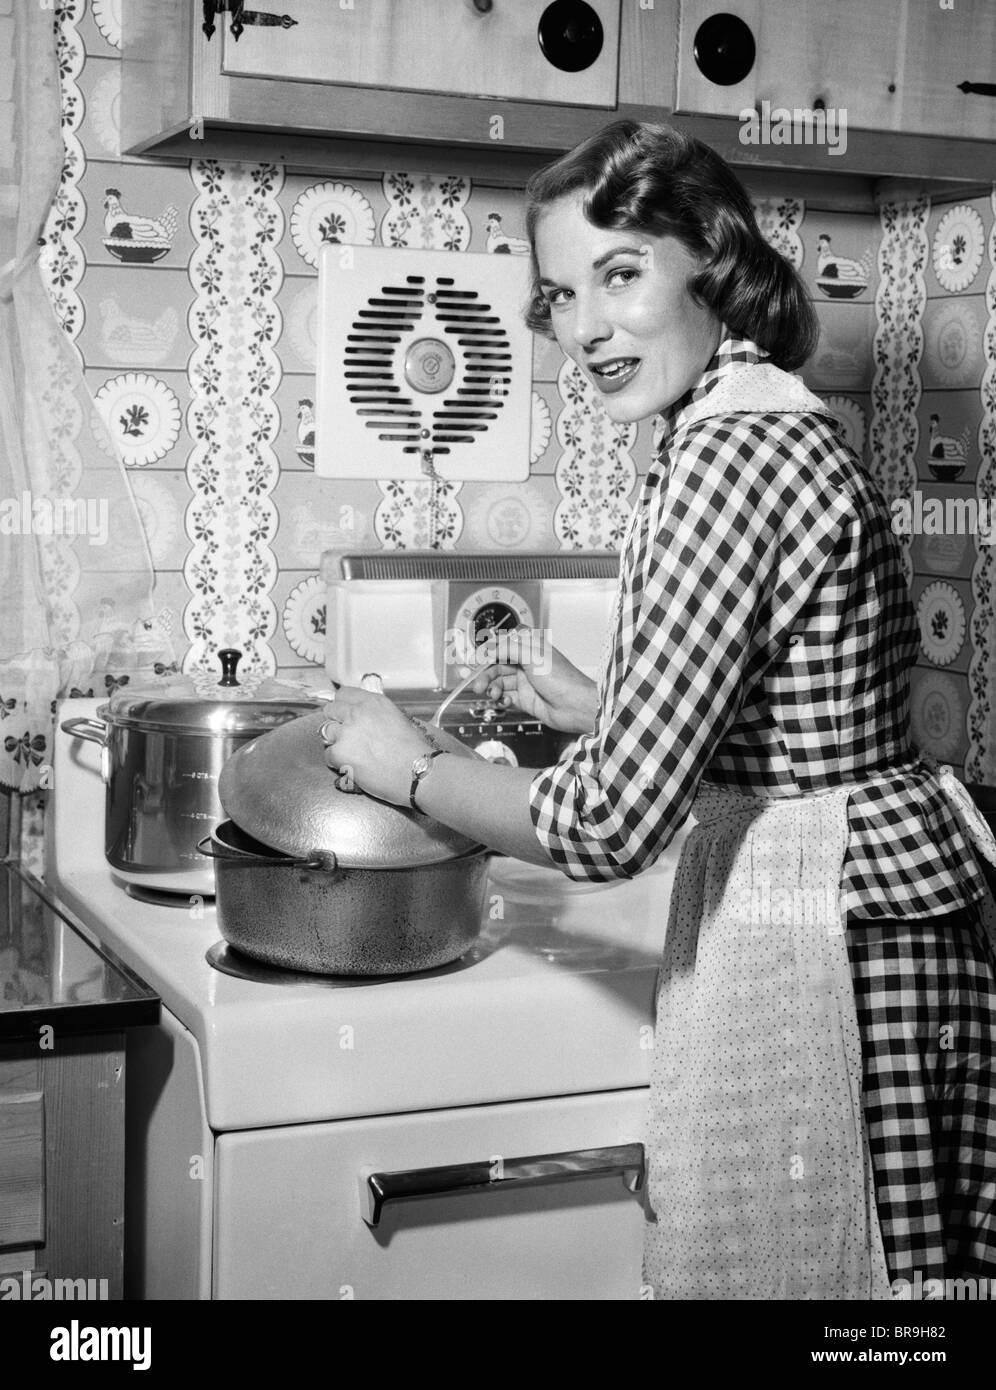 1950s HOUSEWIFE WEARING CHECKERED DRESS STANDING IN KITCHEN STIRRING POT ON  STOVE LOOKING OVER SHOULDER Stock Photo - Alamy